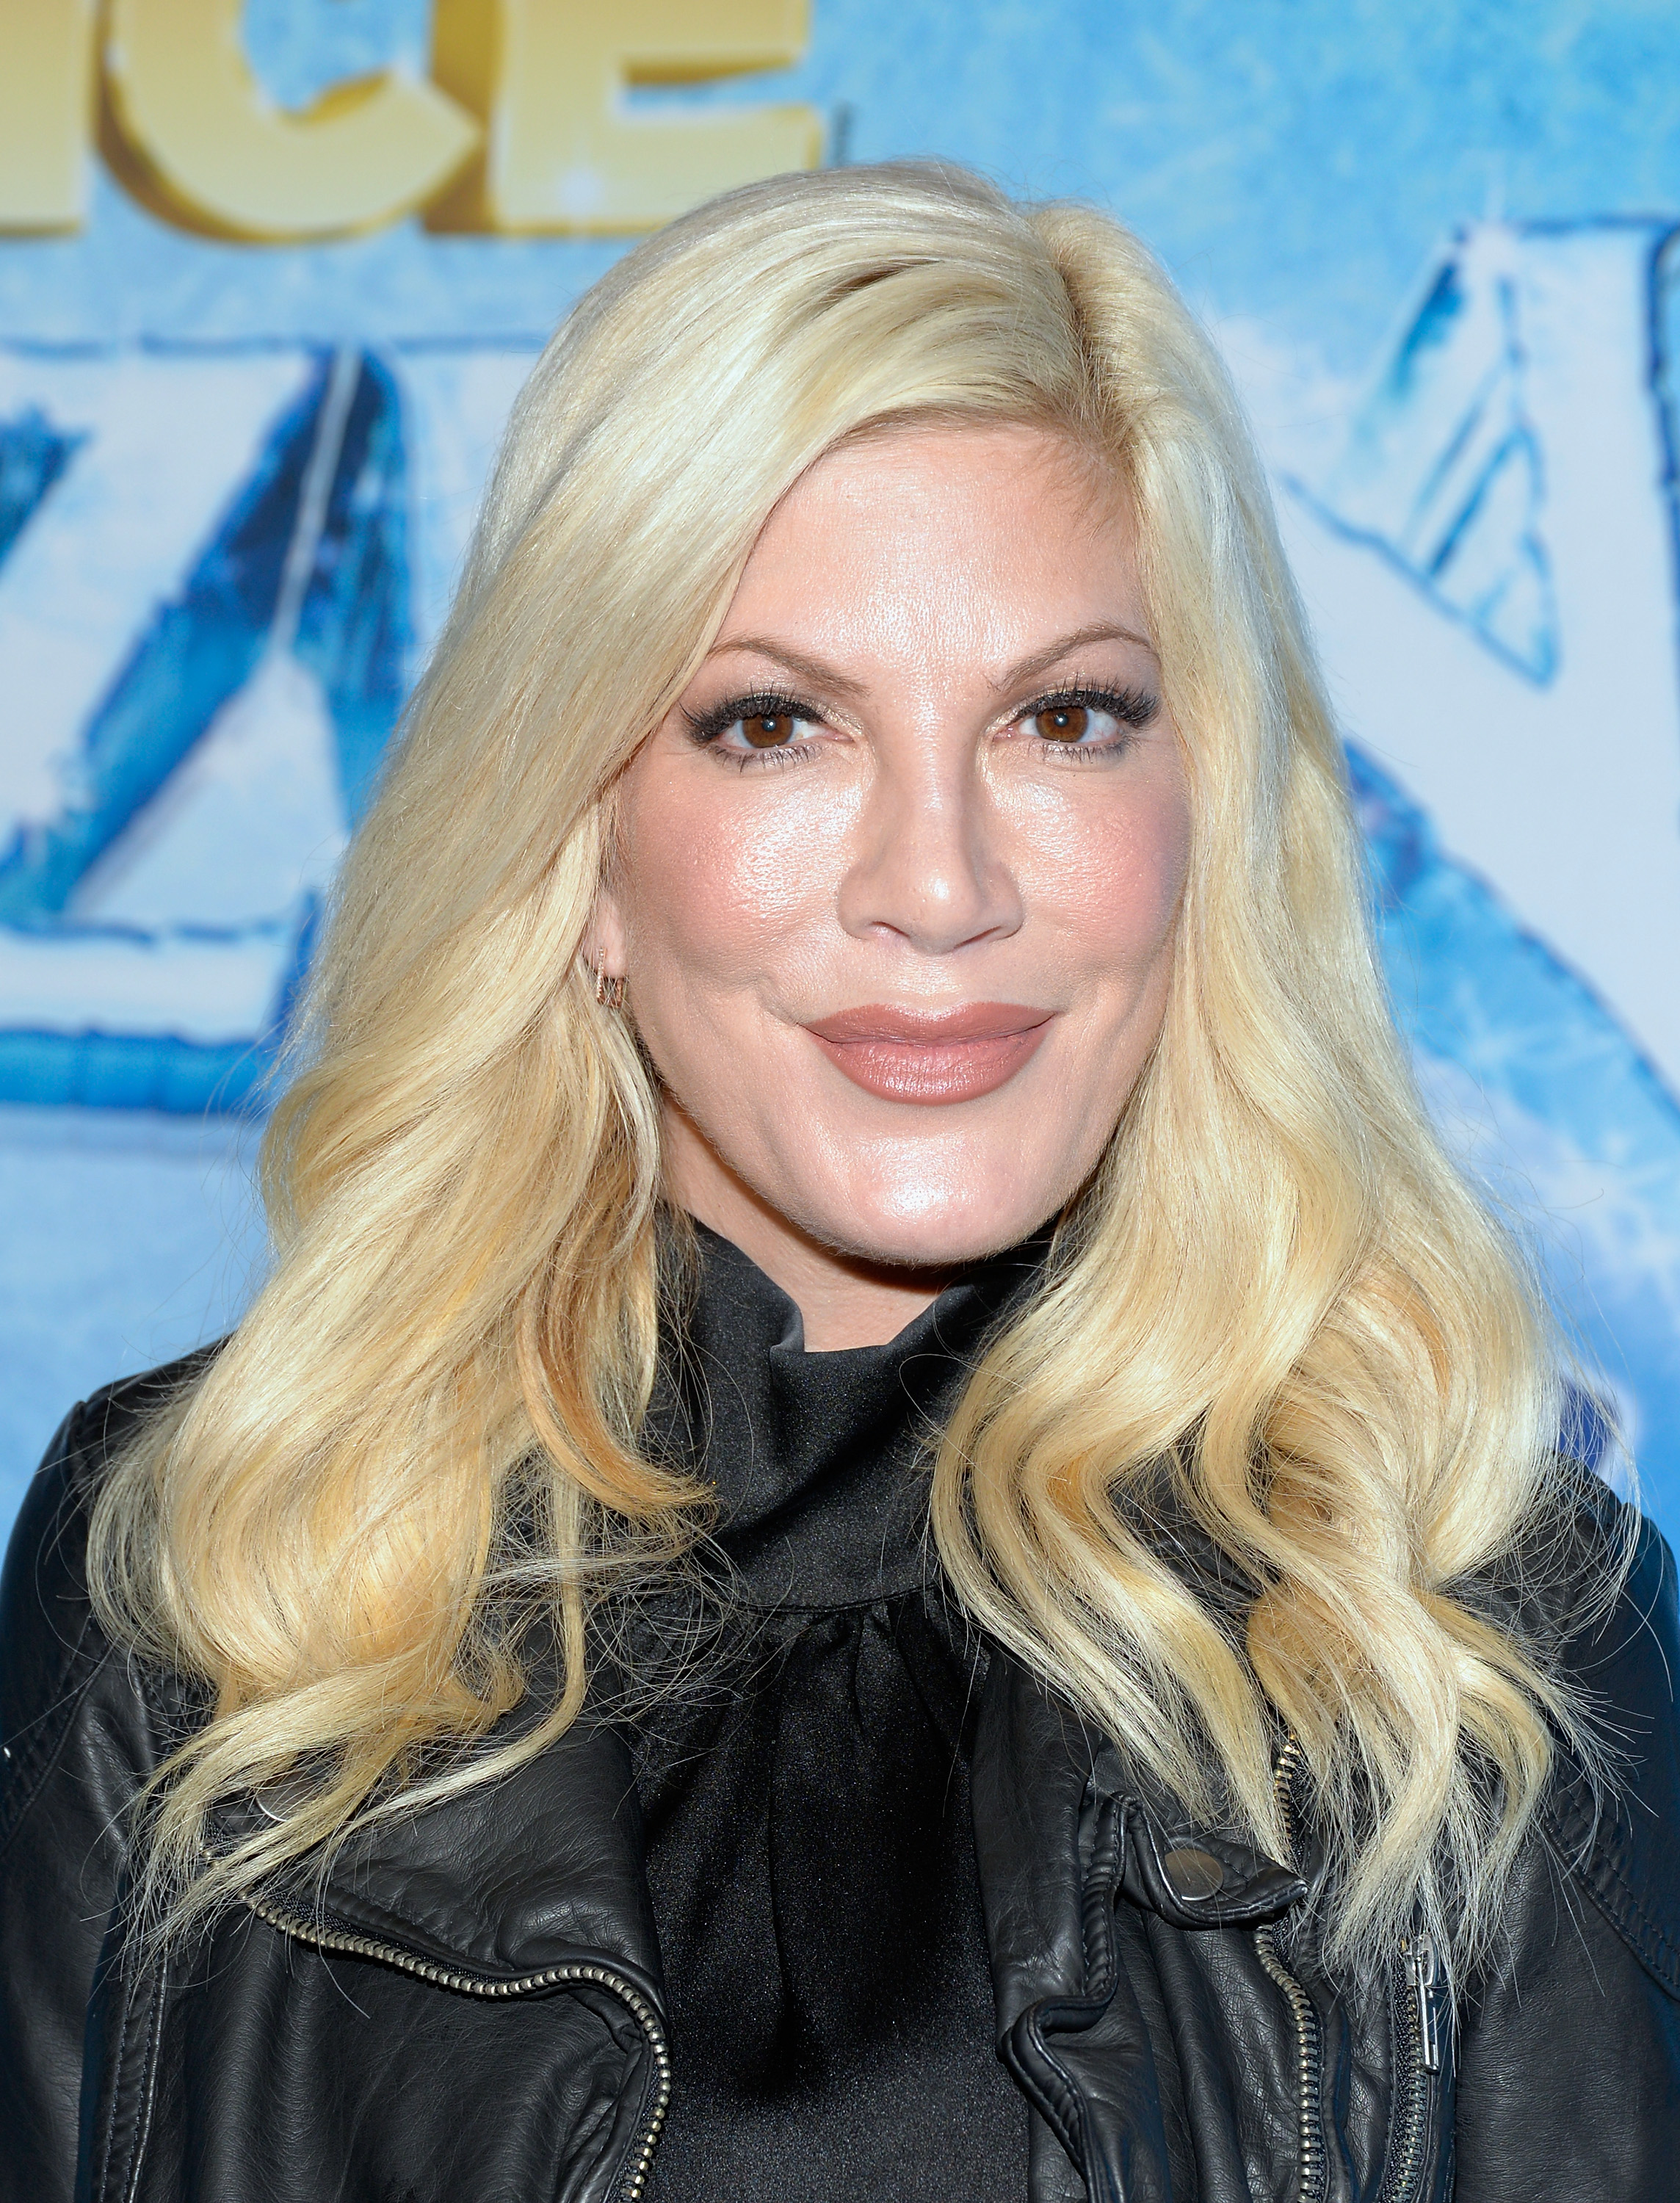 Tori Spelling attends the premiere of "Frozen," 2015 | Source: Getty Images